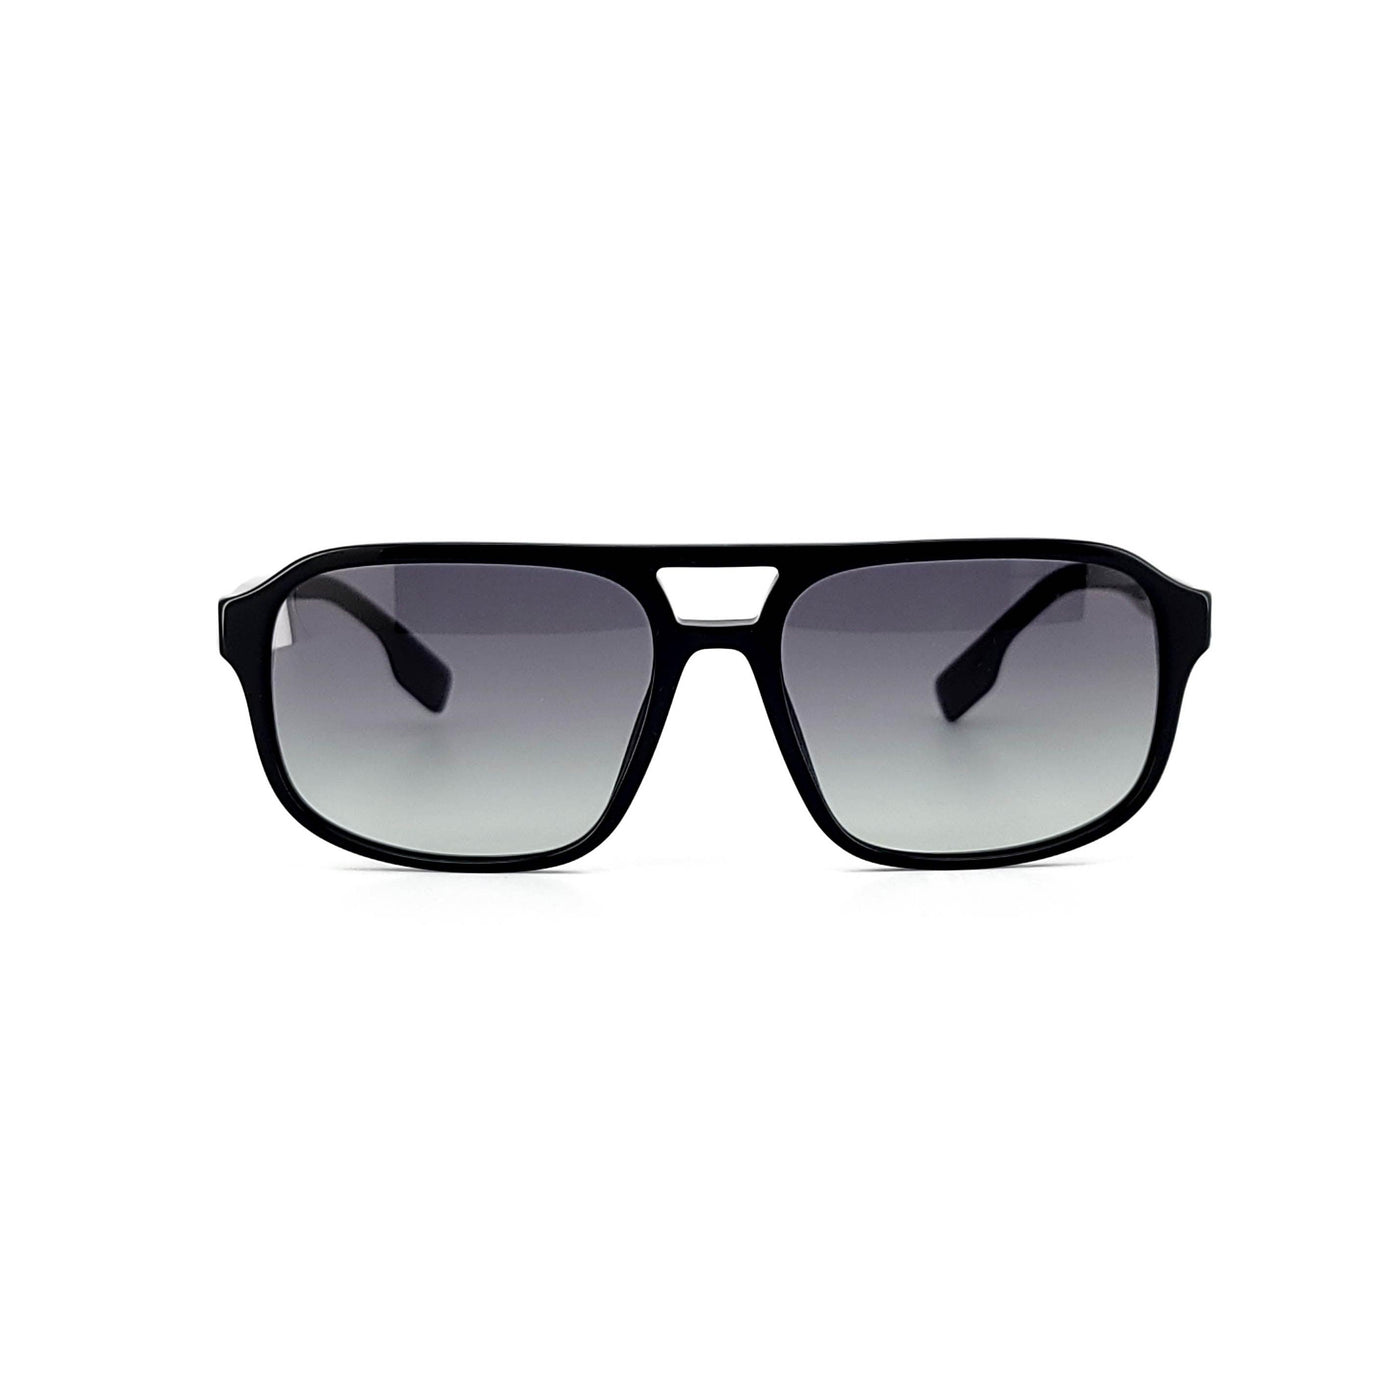 Burberry BE4320/3001/11 | Sunglasses - Vision Express Optical Philippines